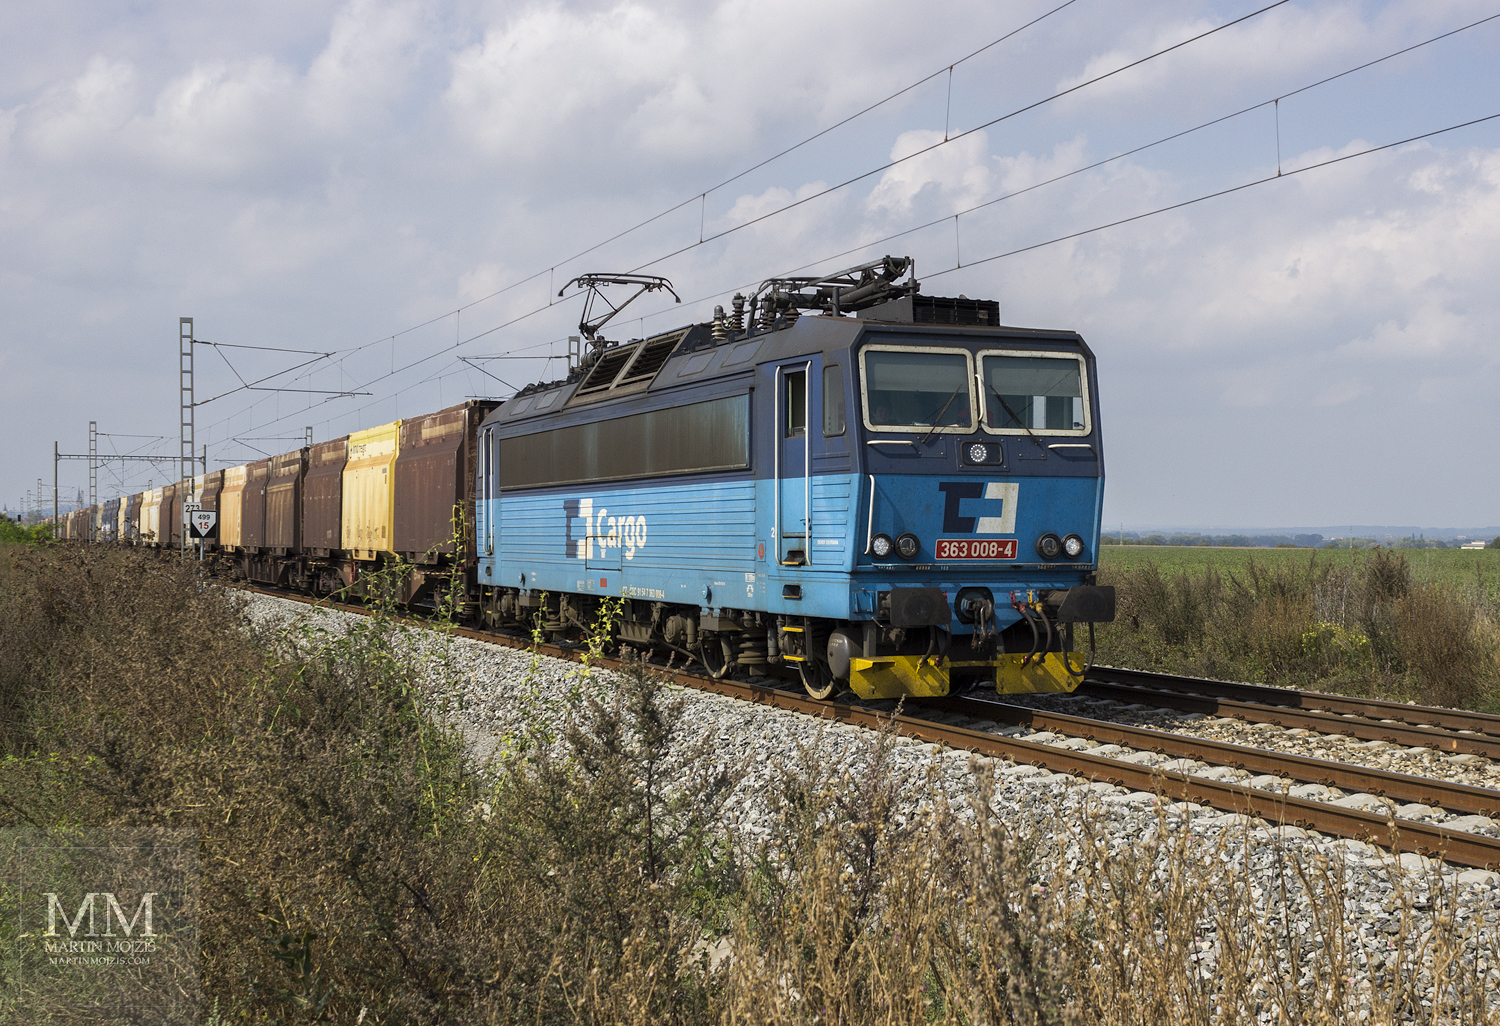 Photograph of freight train in head with locomotive Skoda 363.